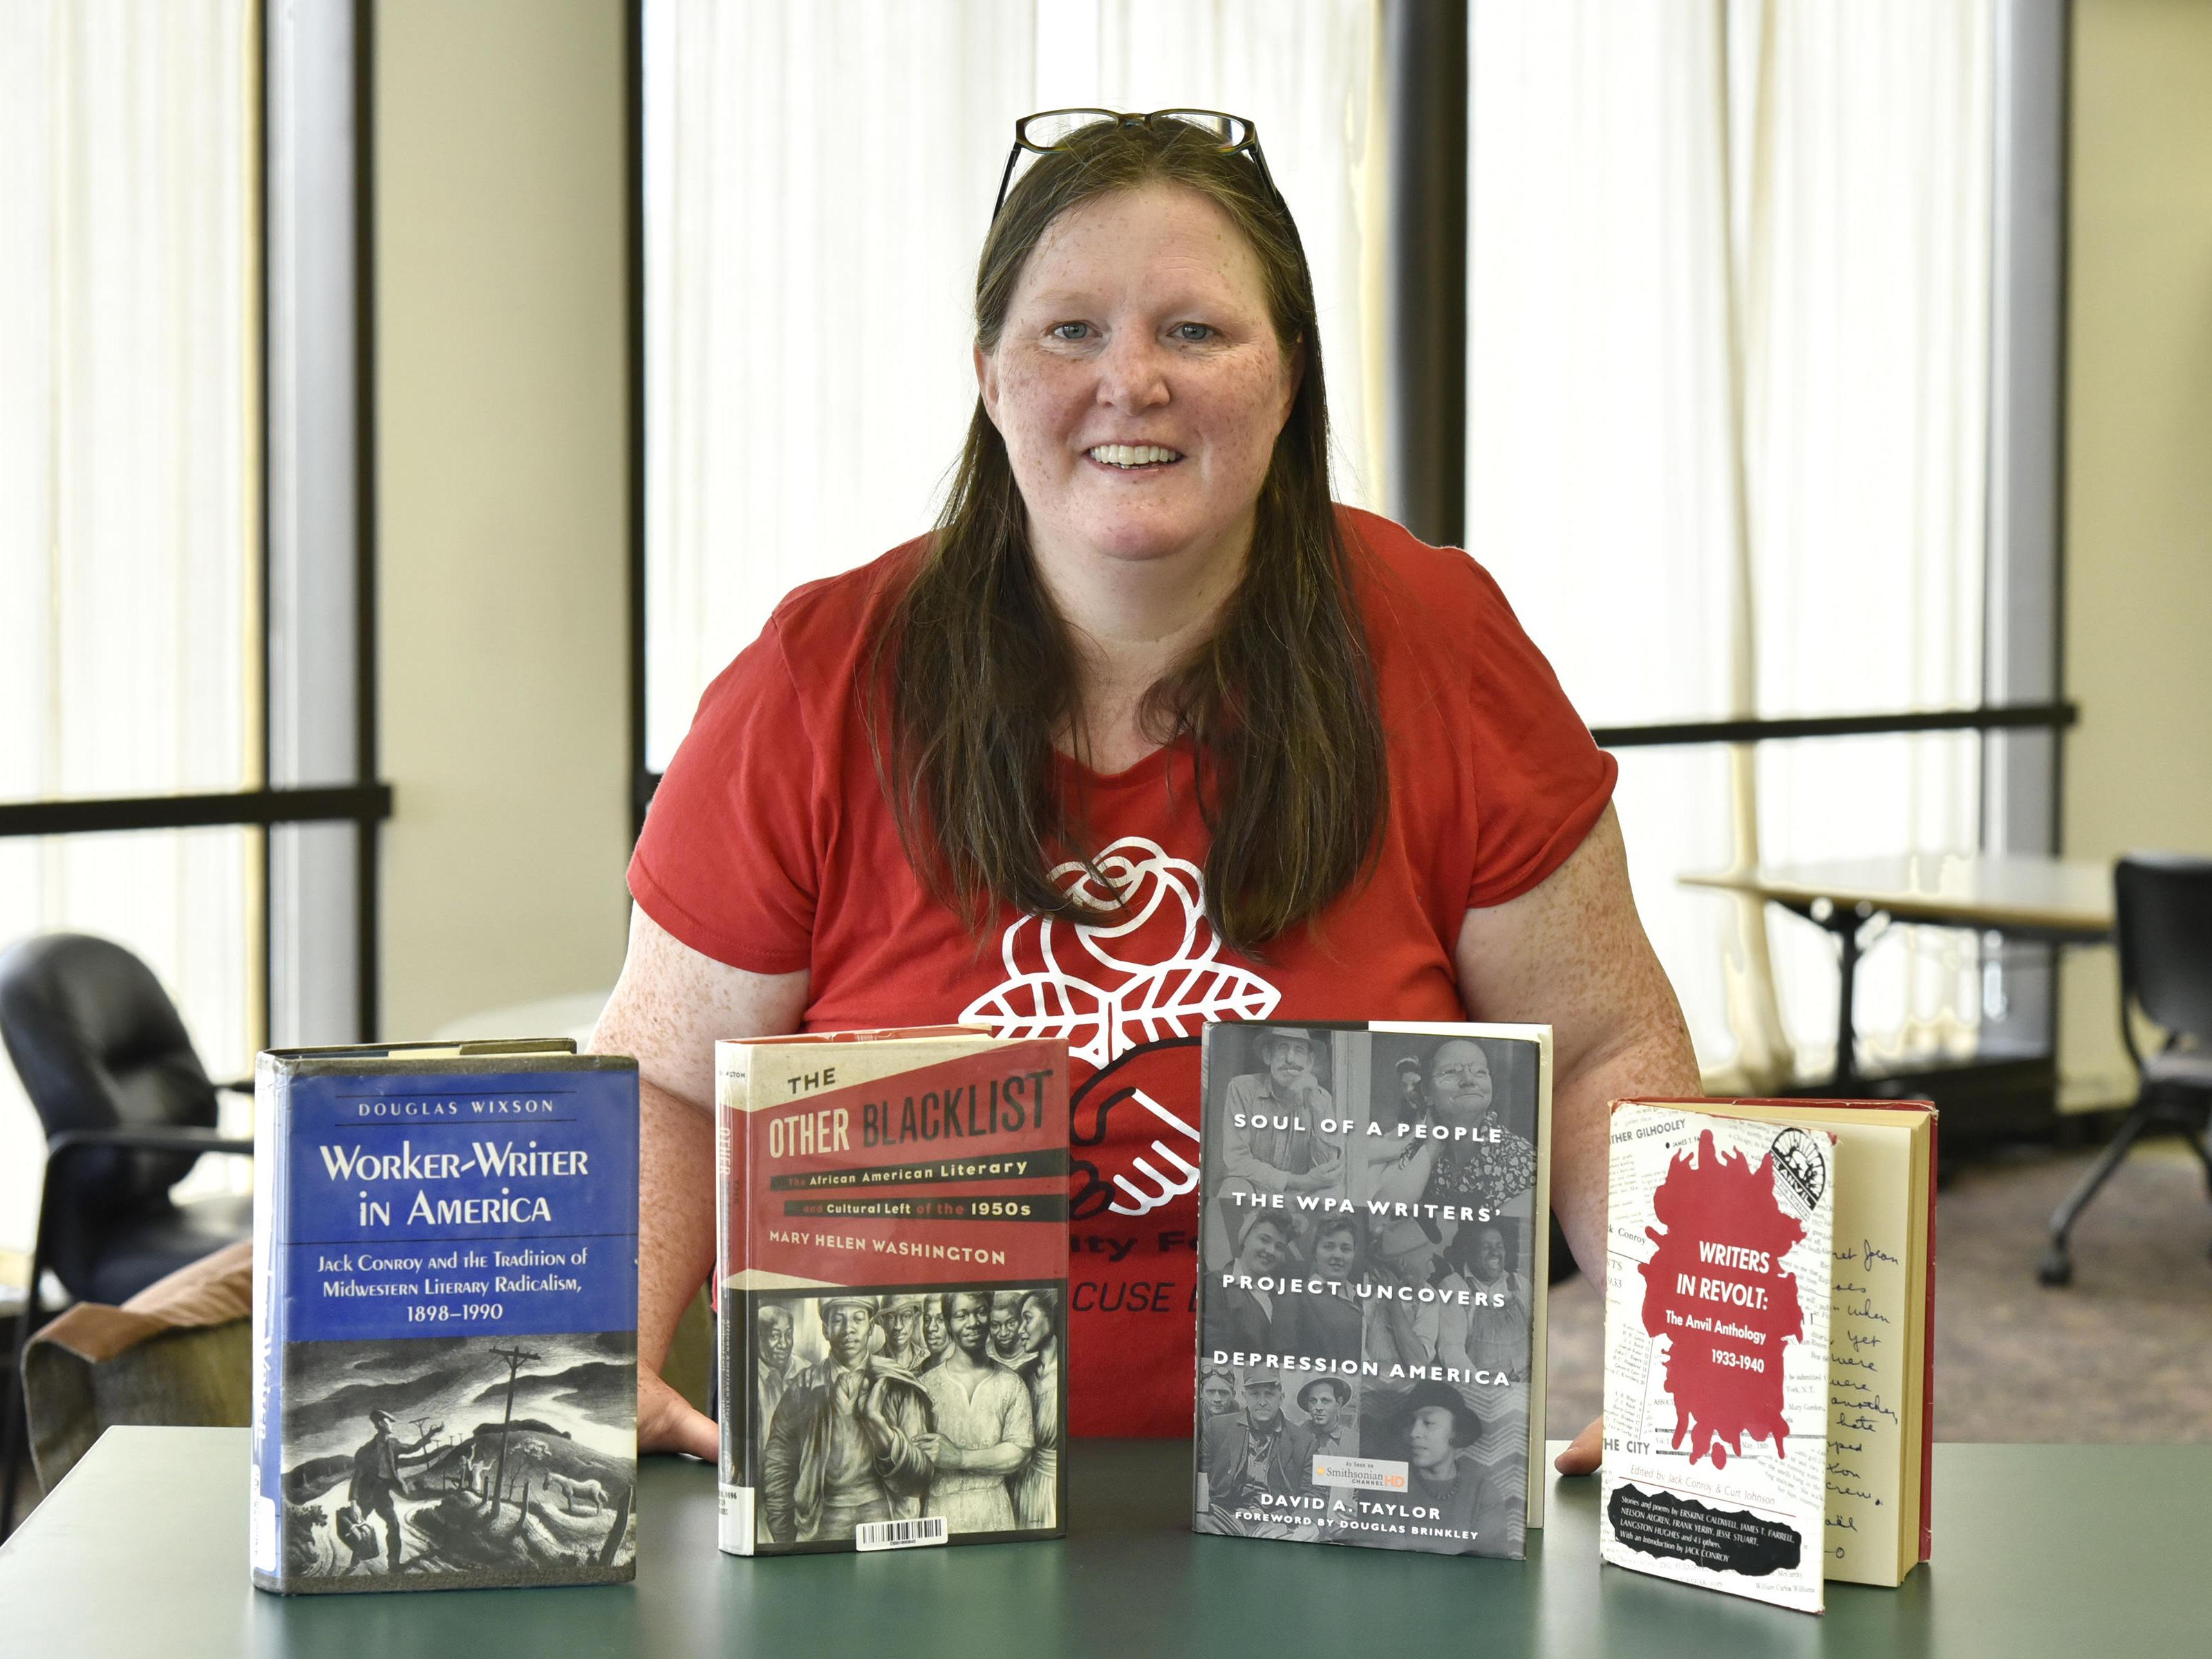 Maureen Curtin with books in Penfield Library